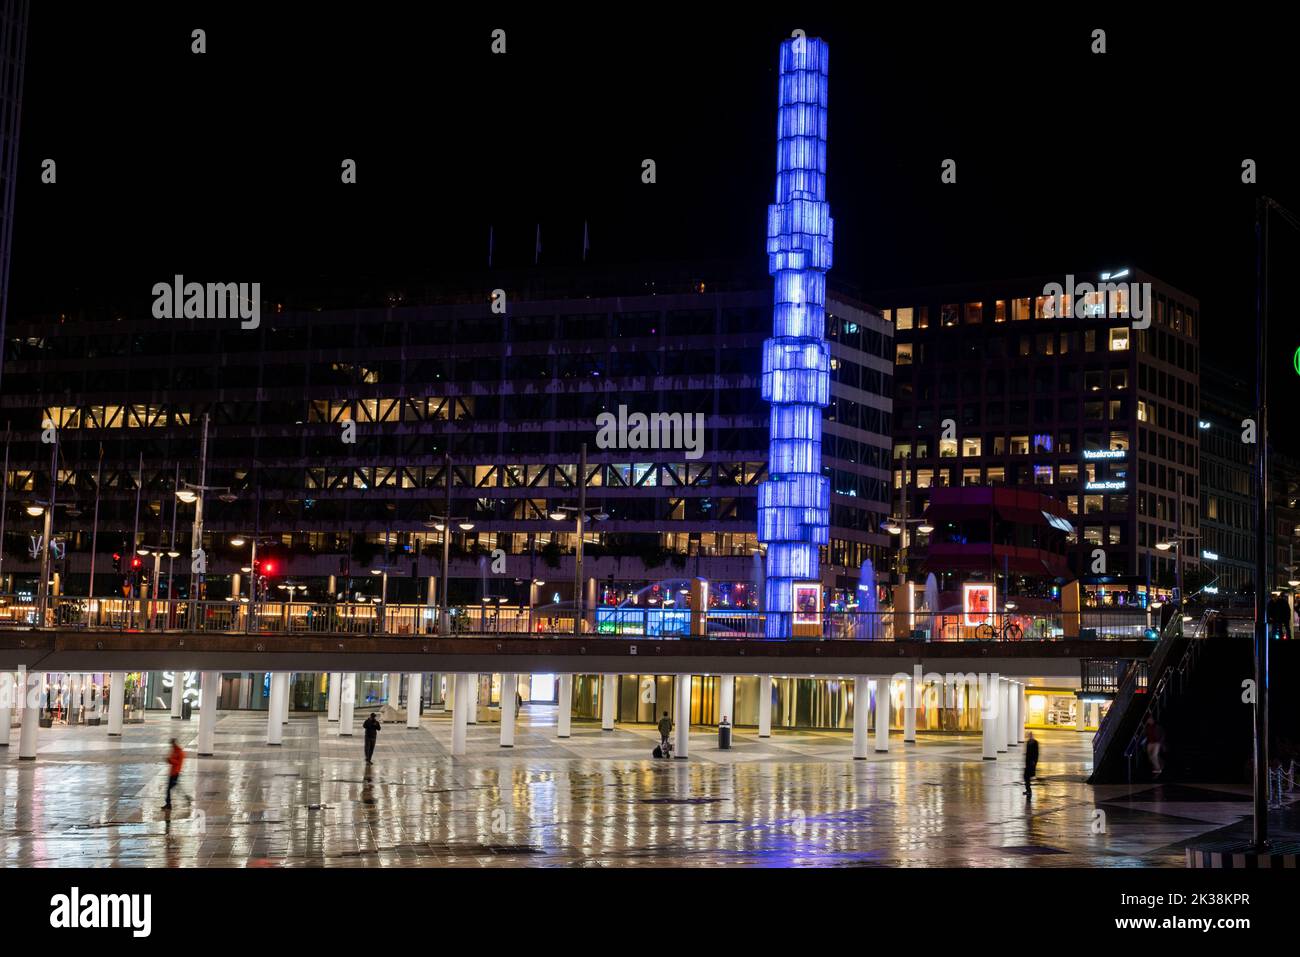 STOCKHOLM - Sweden, March 7, 2021, view of the Sergels Torg square at night with a glass obelisk in the city center with traffic Stock Photo